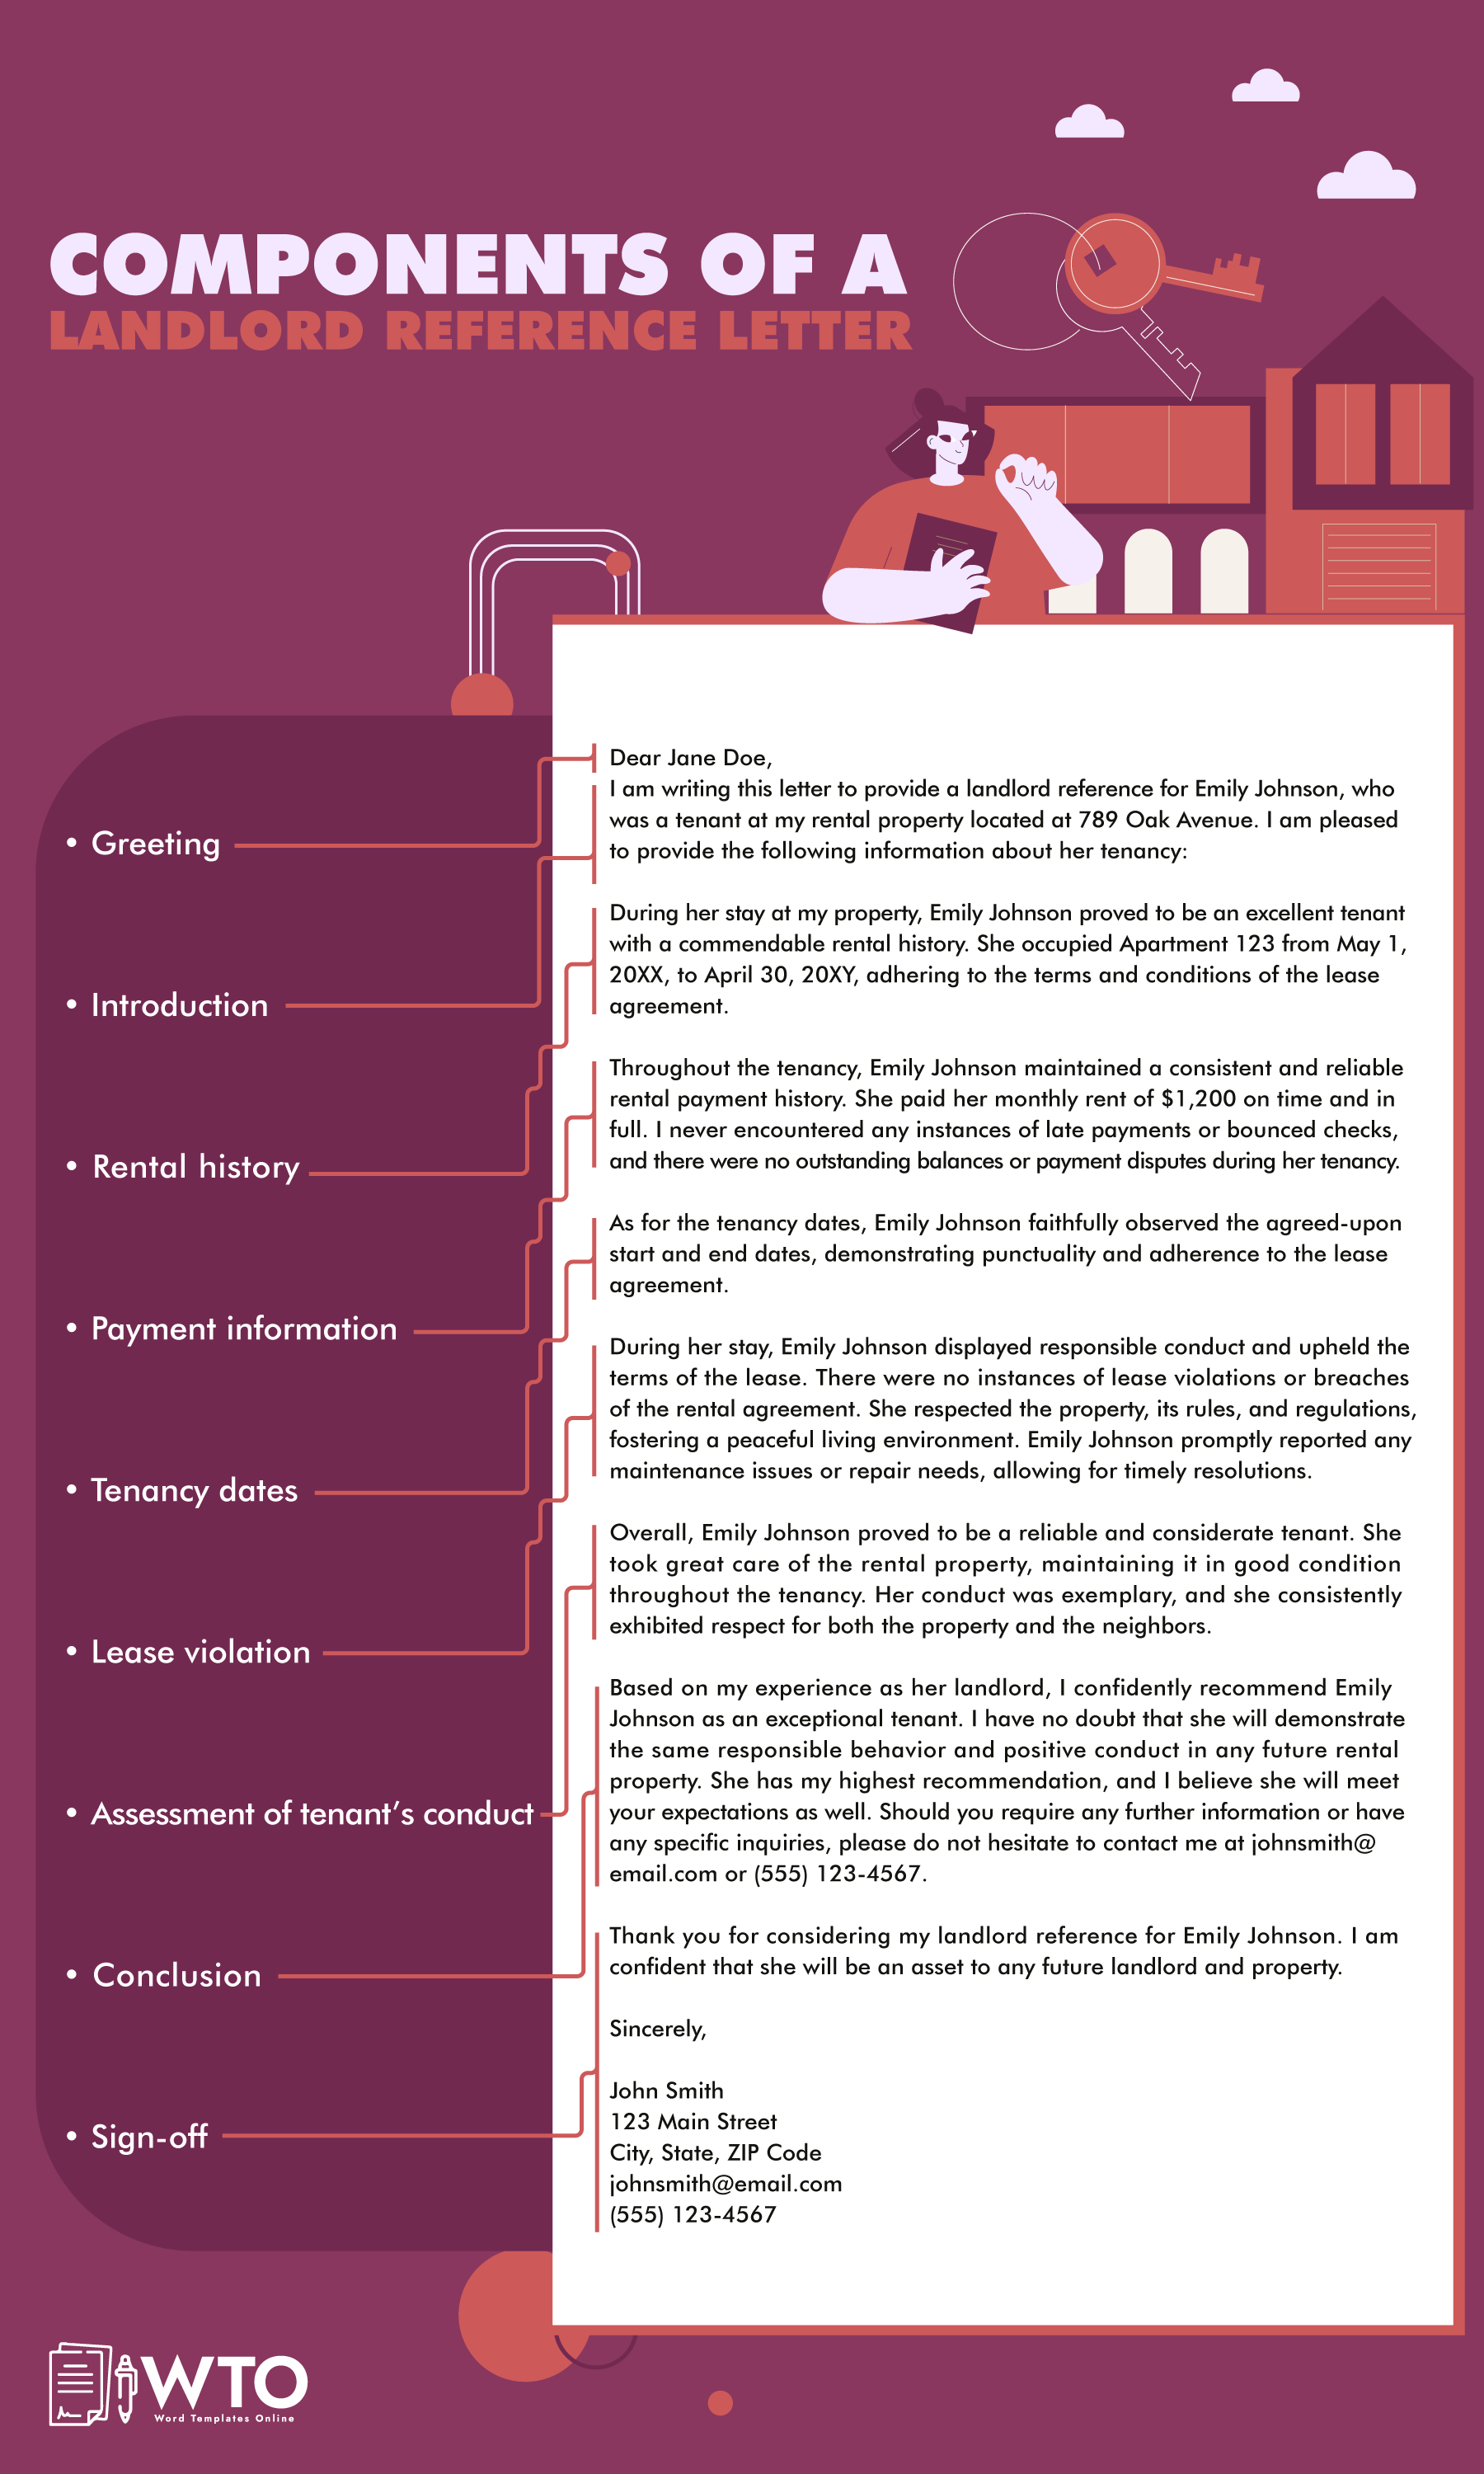 This Infographic contains the components of a Landlord Reference Letter.